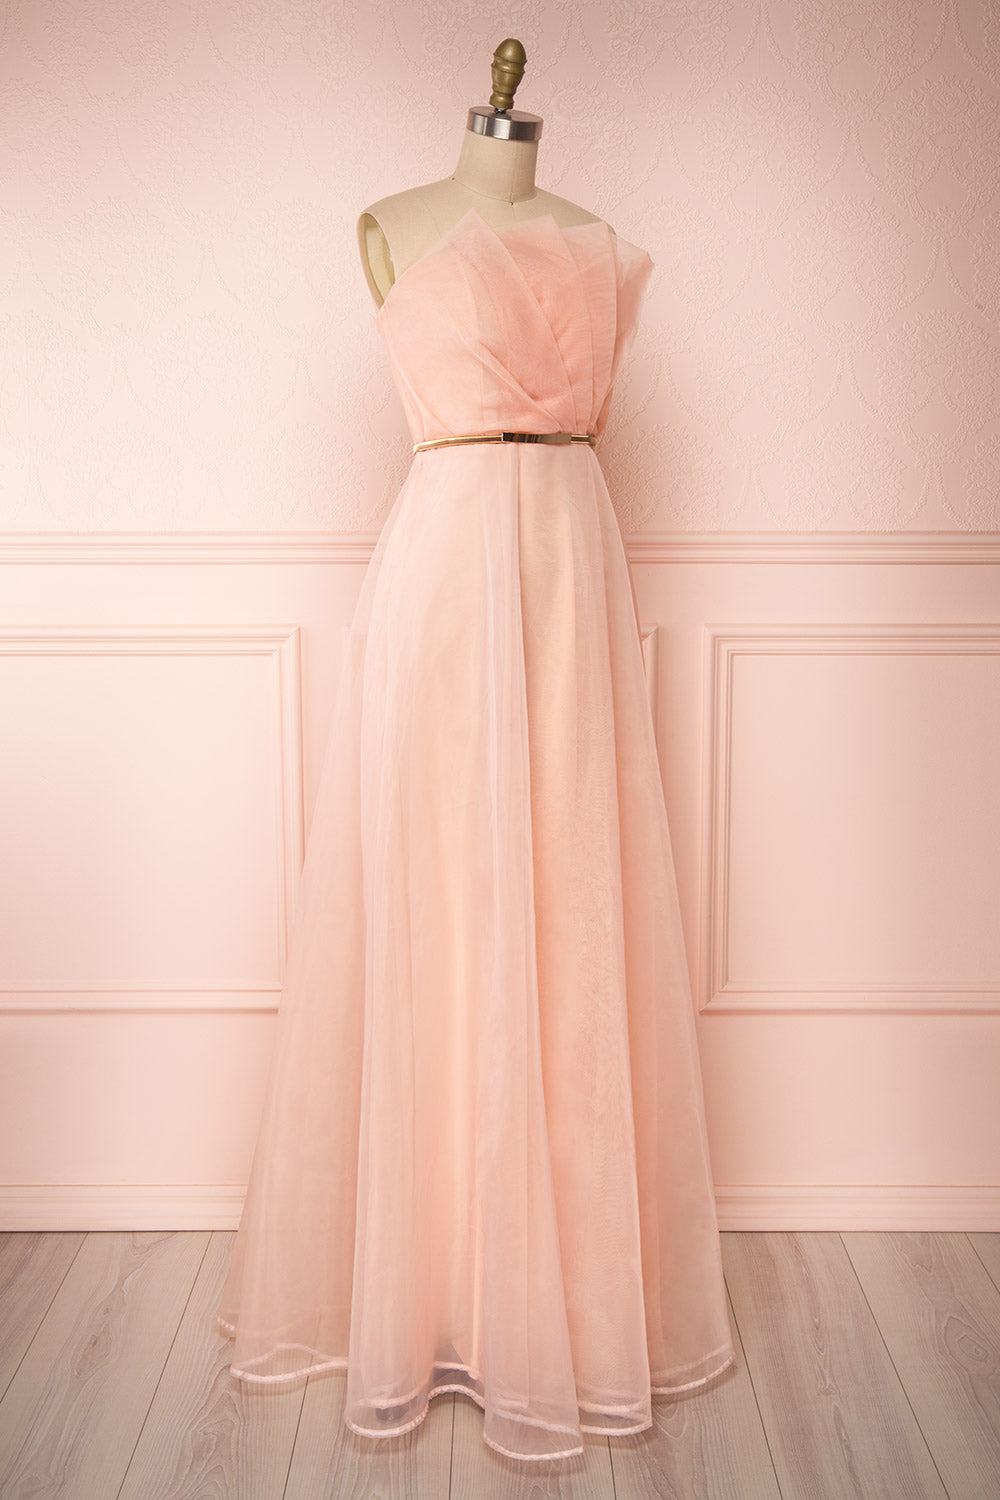 Azeline Blush Pleated Tulle Prom Dress | Boutique 1861 side view 